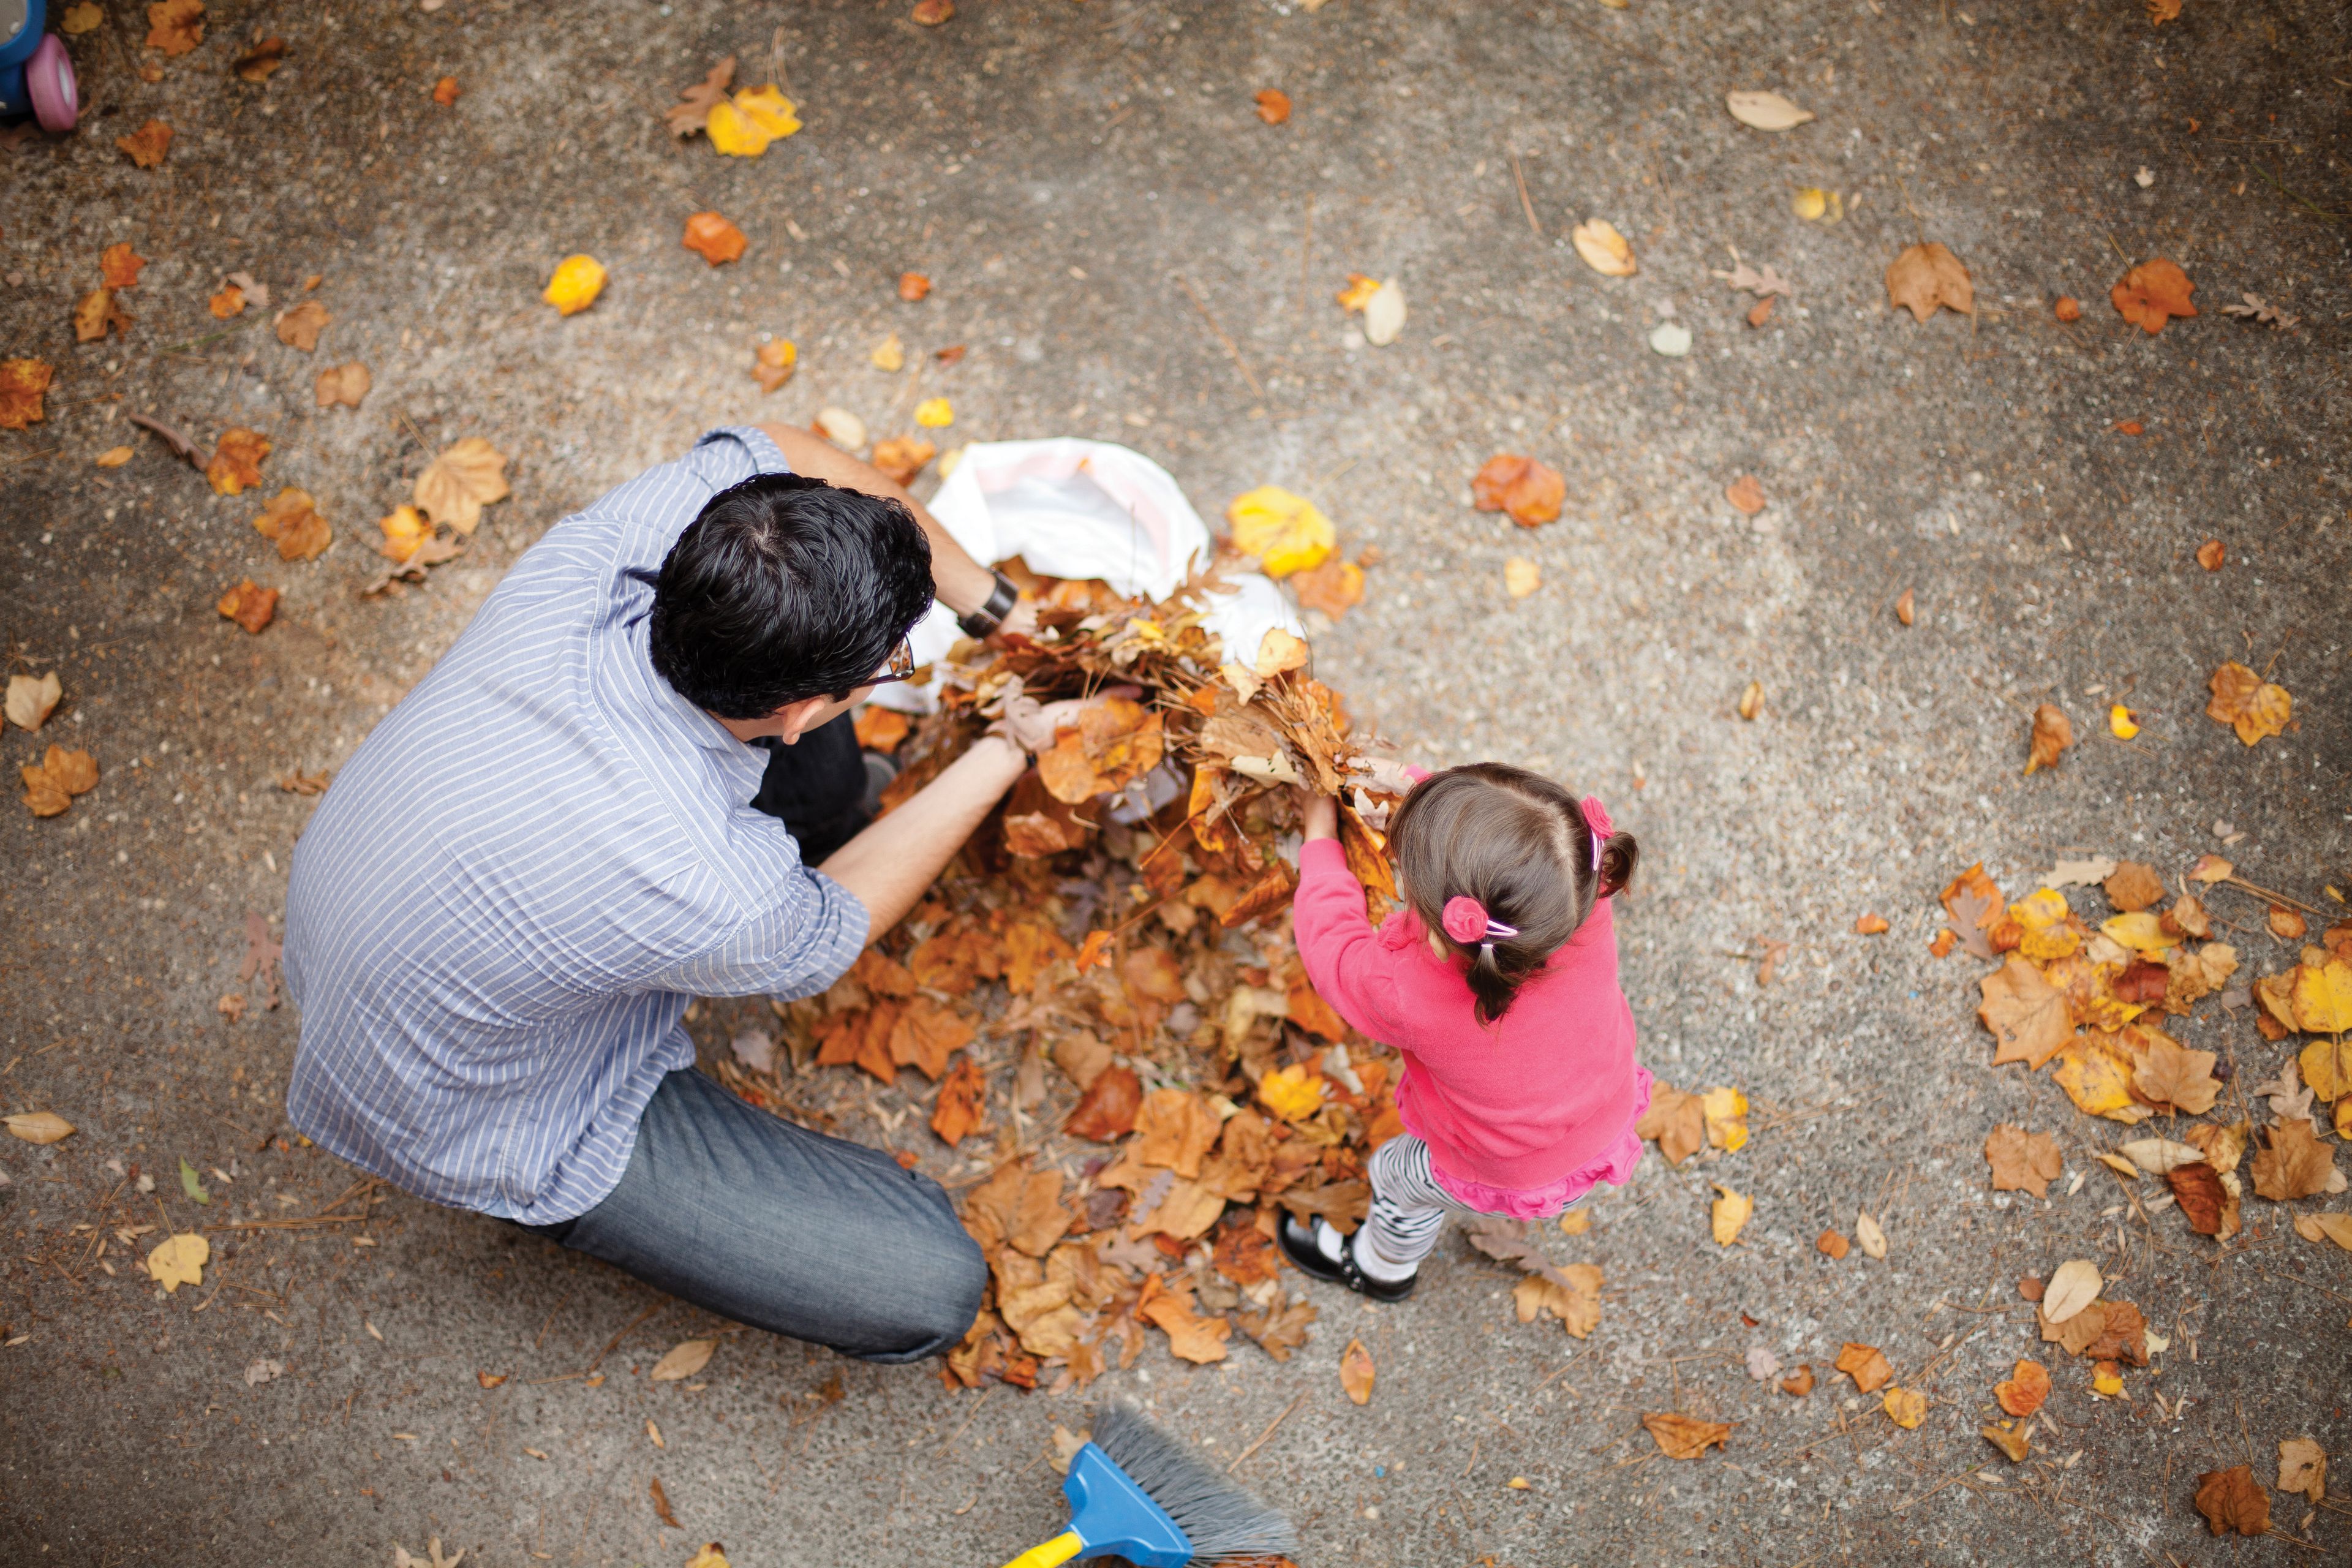 A daughter helps her father gather leaves.